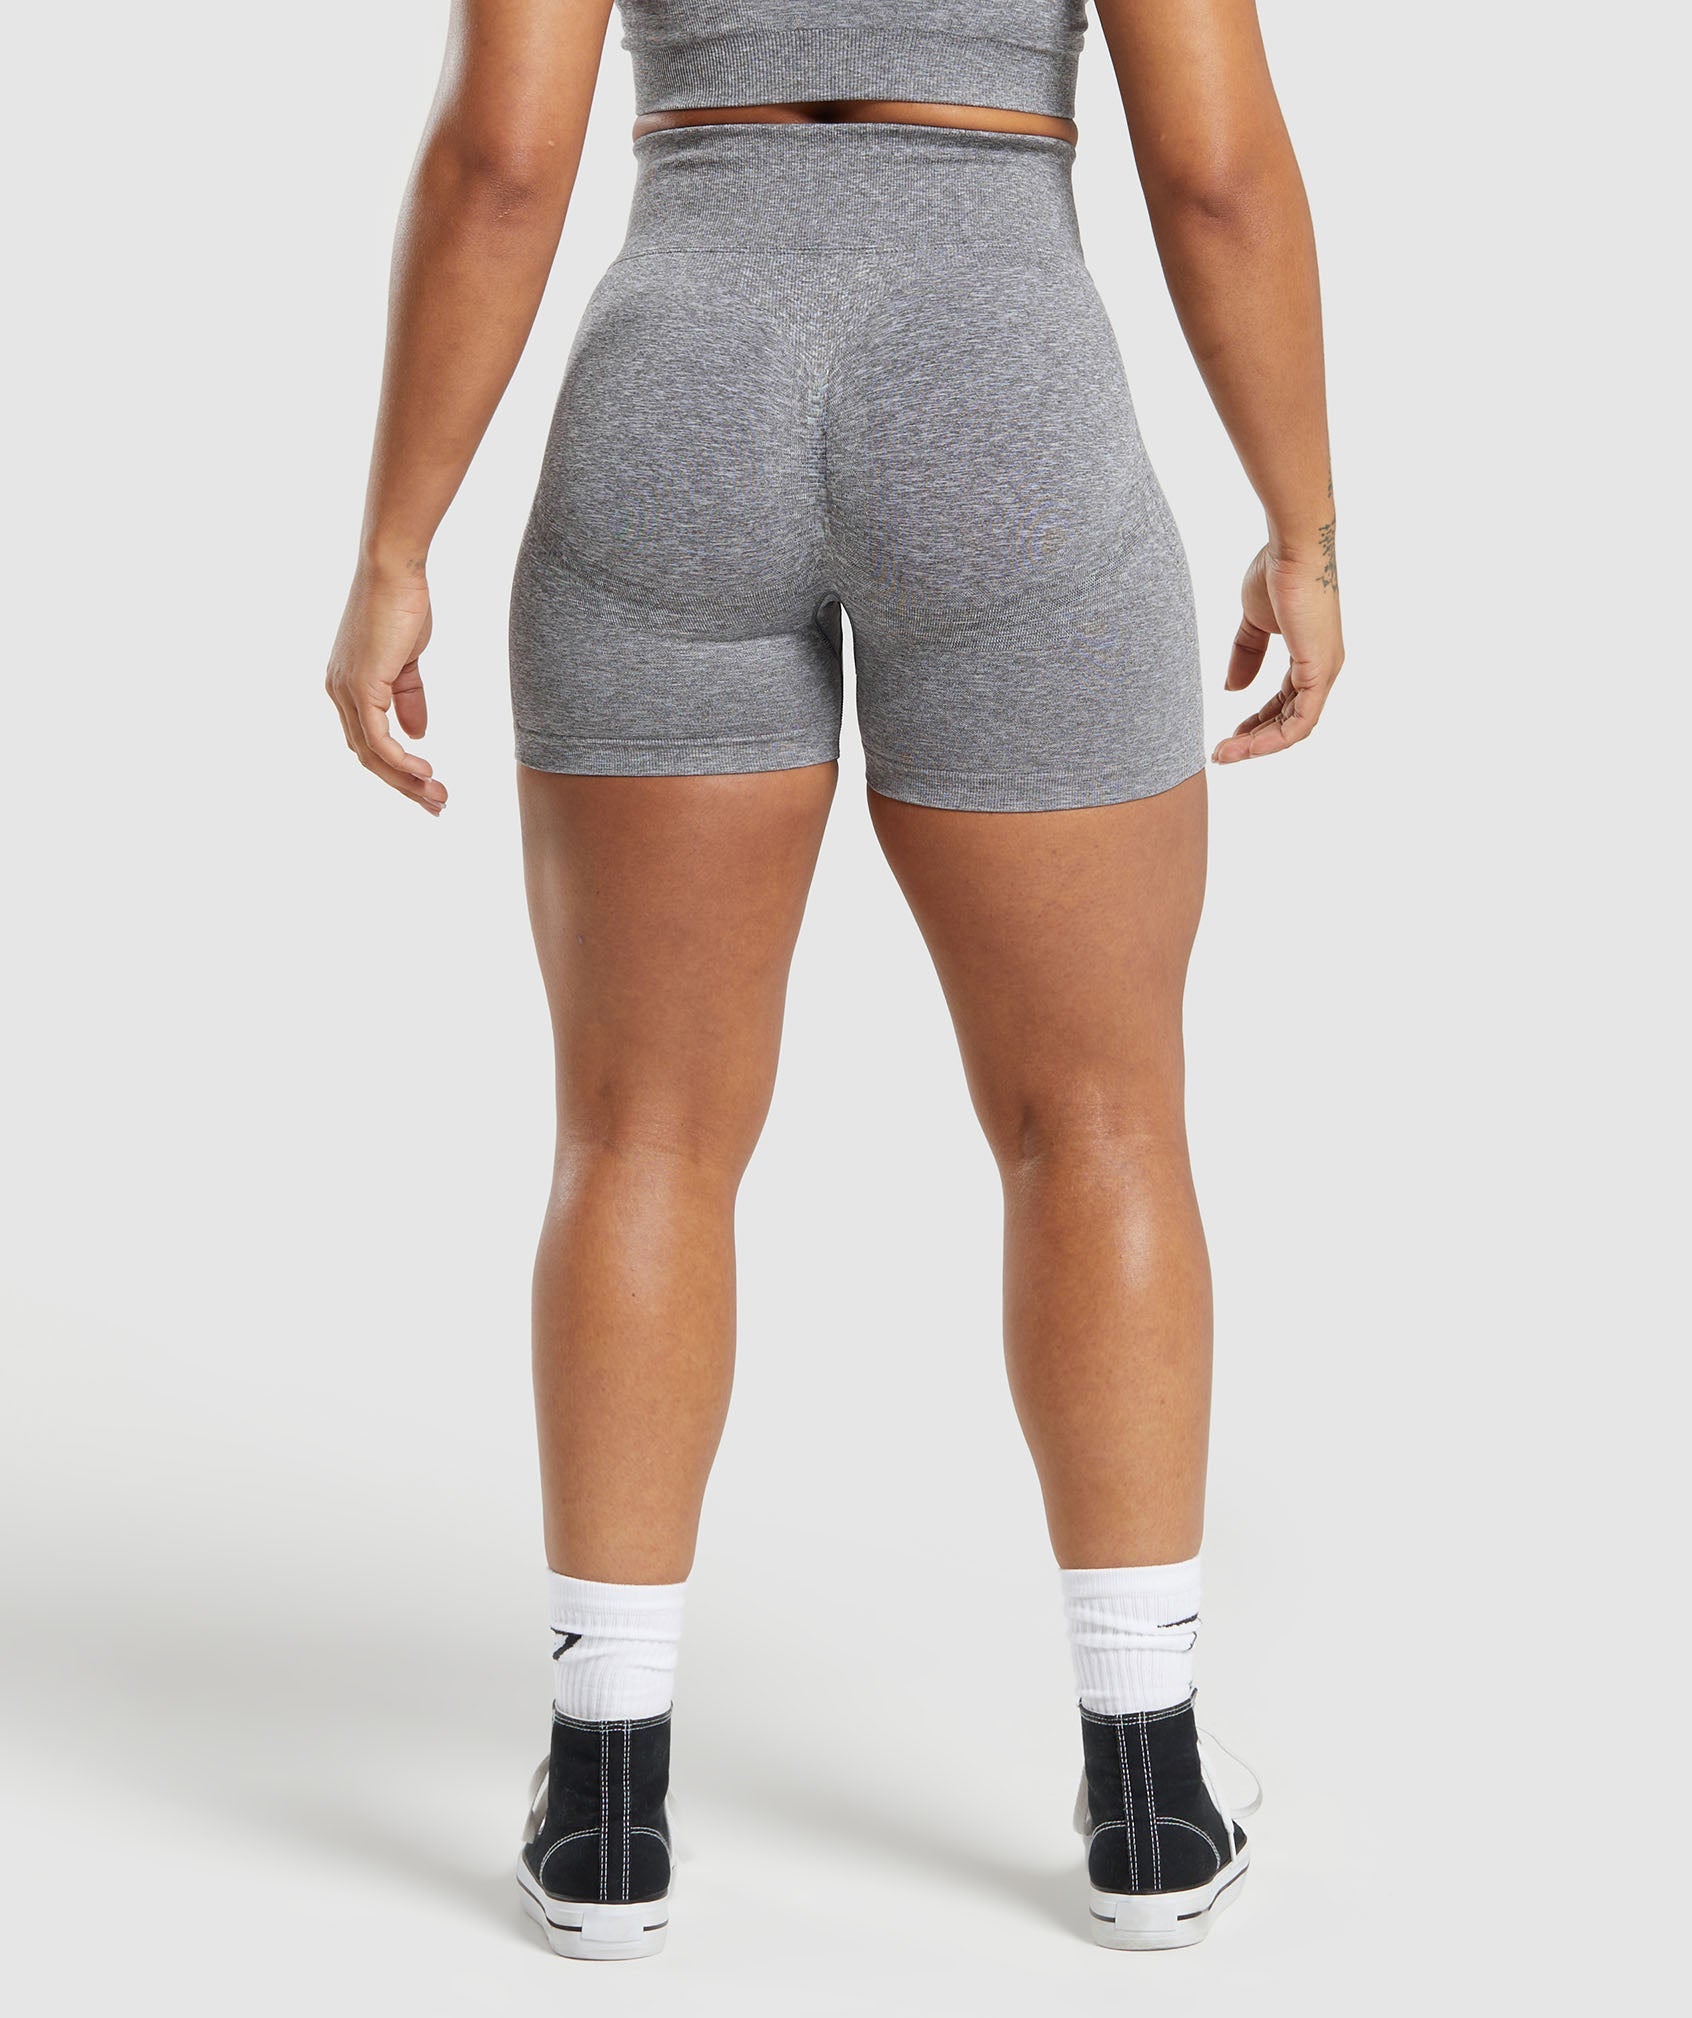 Lift Contour Seamless Shorts in Brushed Grey/White Marl - view 5